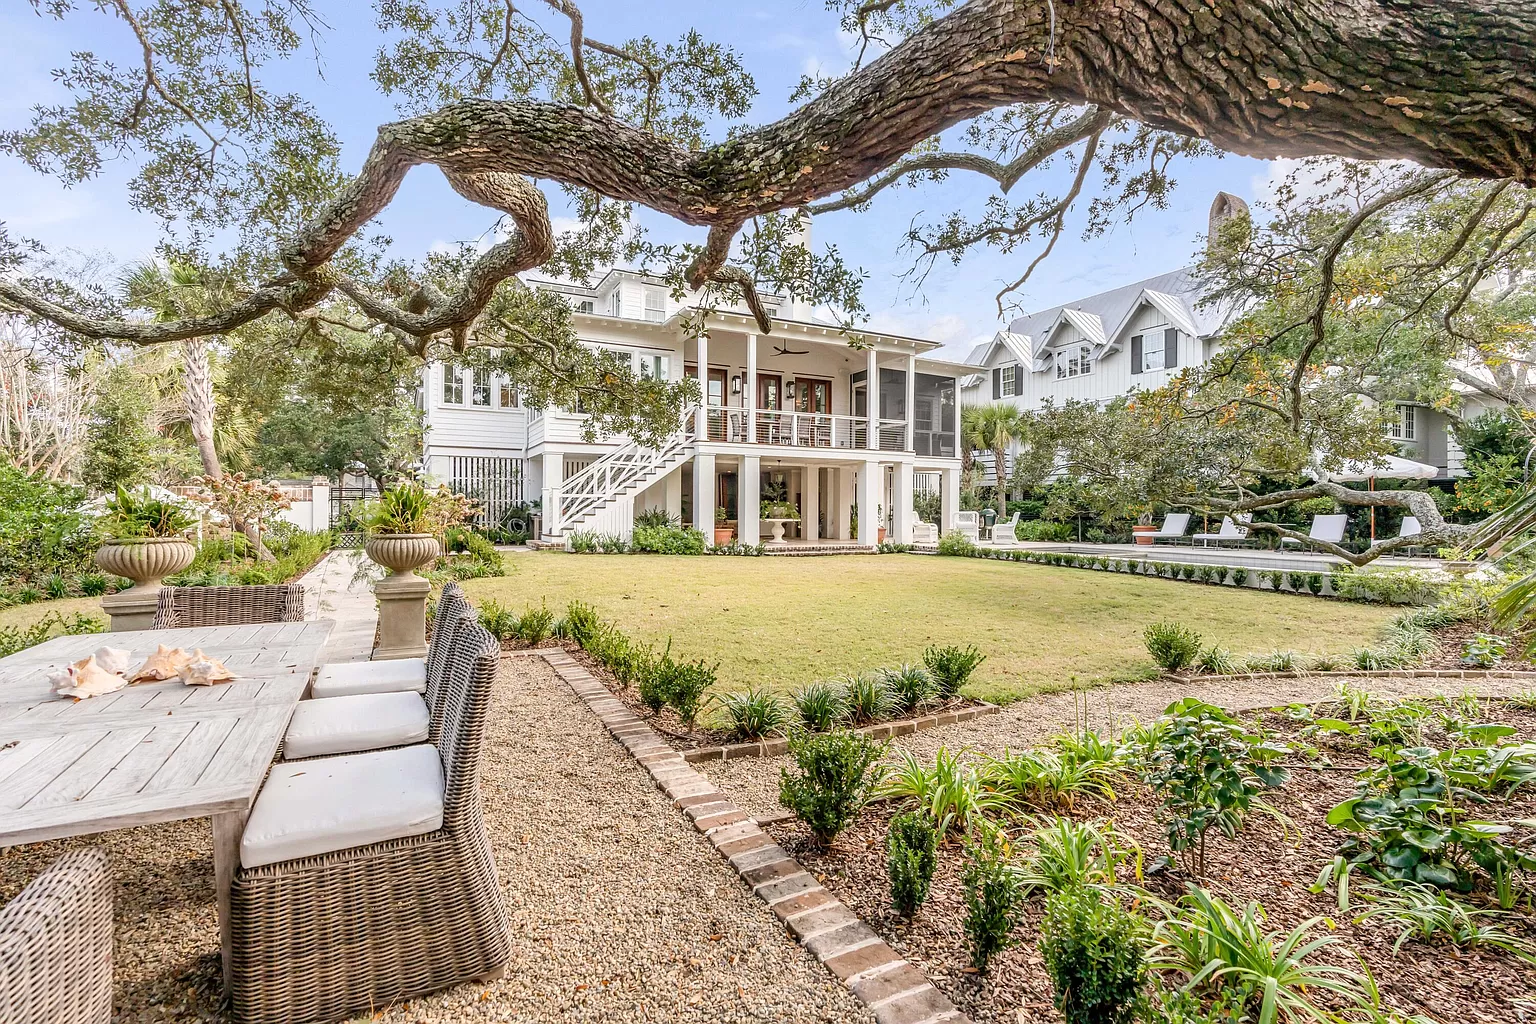 Home tour featuring Charleston Harbor home traditional front entrance